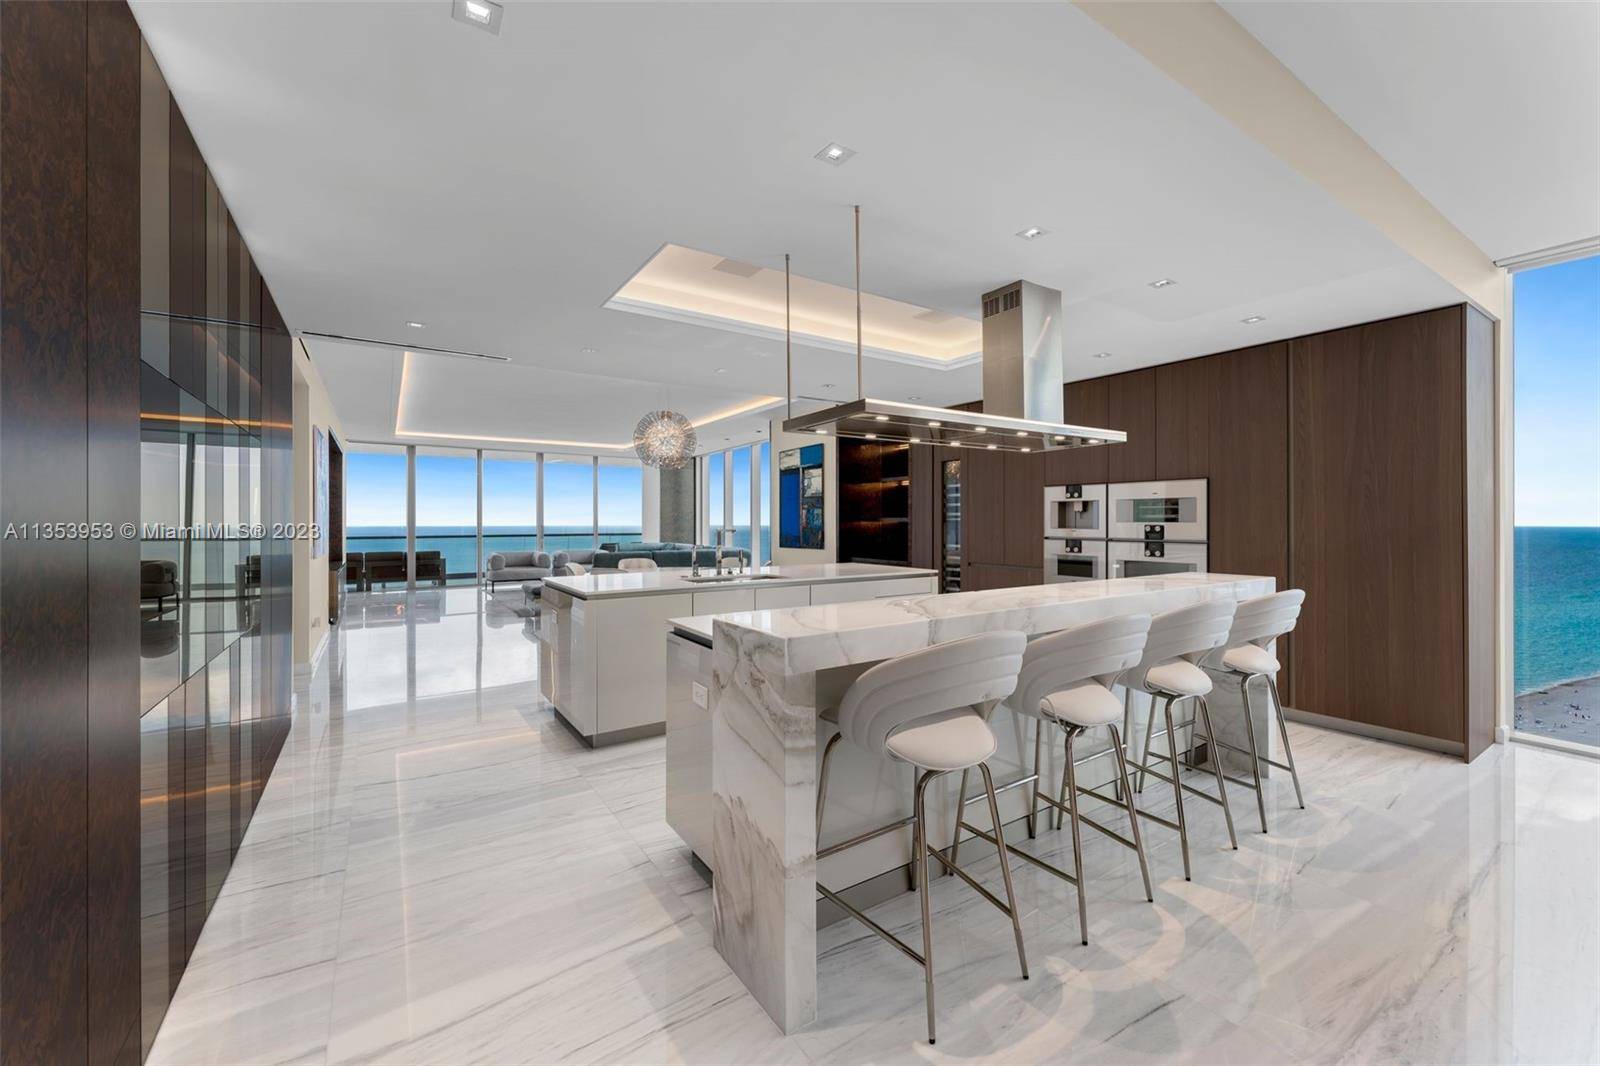 This luxurious, one of a kind 4 bedroom, 4 1 half bathroom home in the sky at the coveted Turnberry Ocean Club offers SE exposure providing stunning, unobstructed 180 degree ...